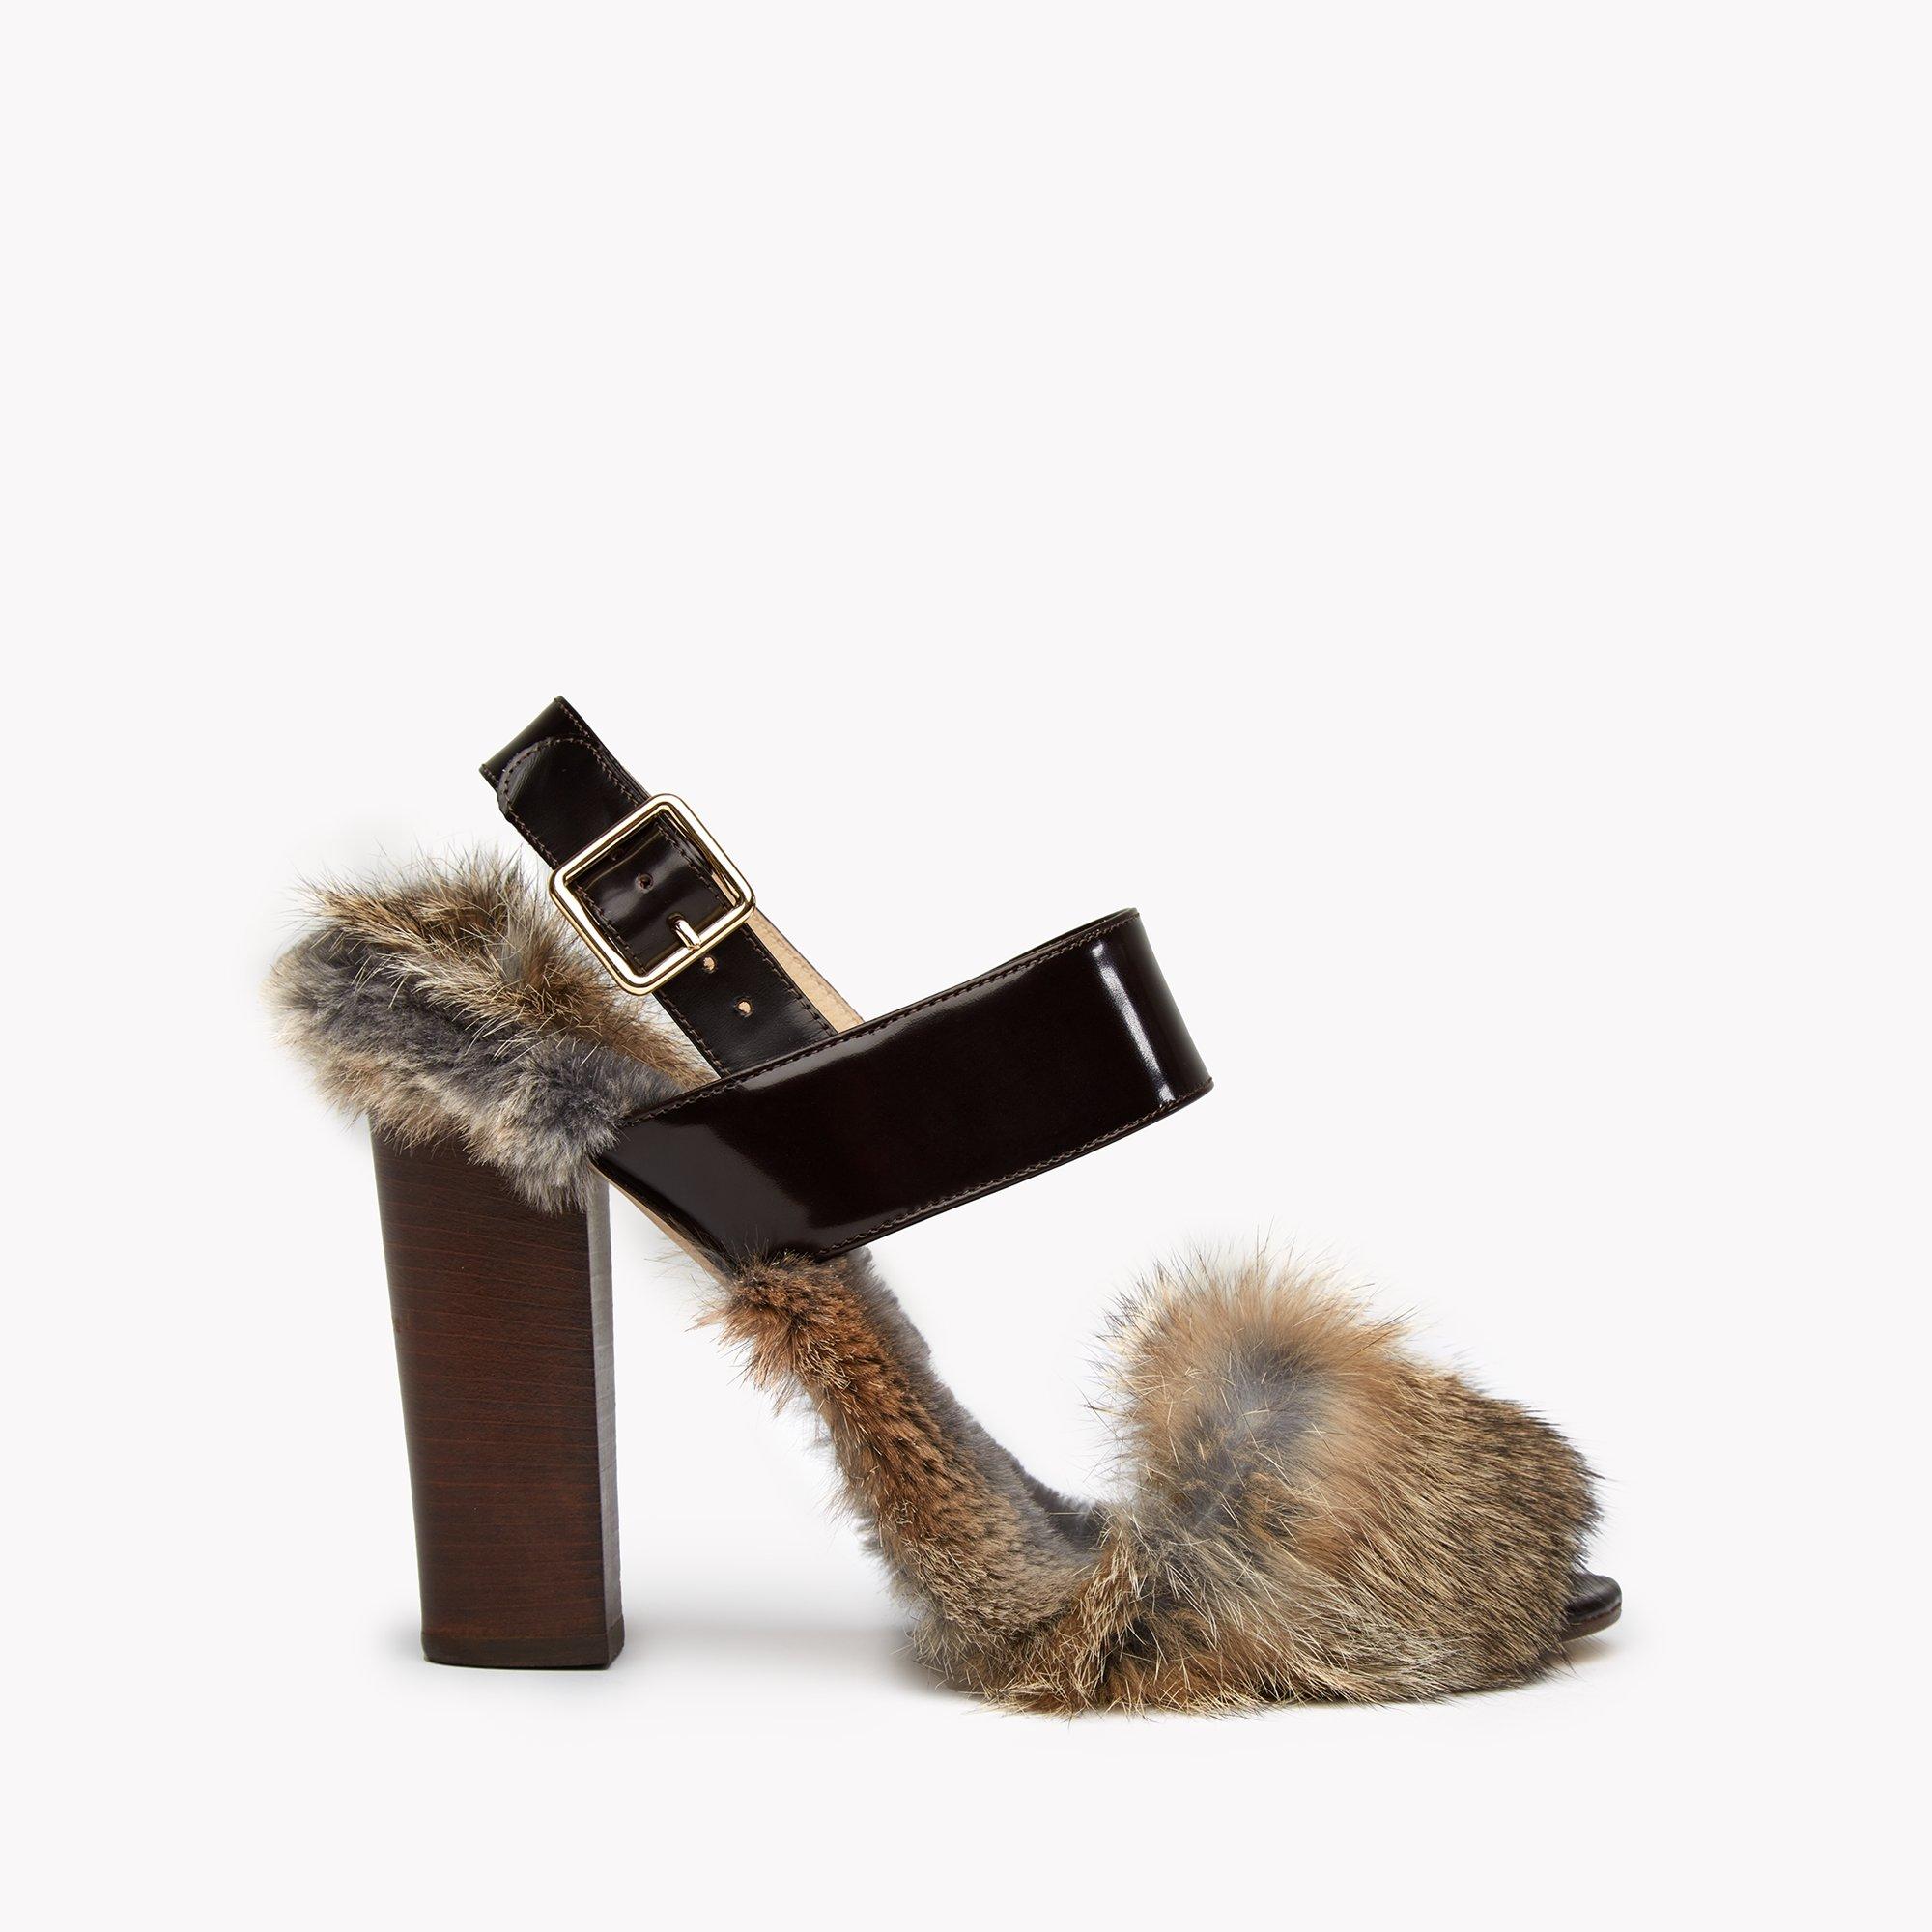 Double Strap Sandal in Spazzalato Leather and Fur